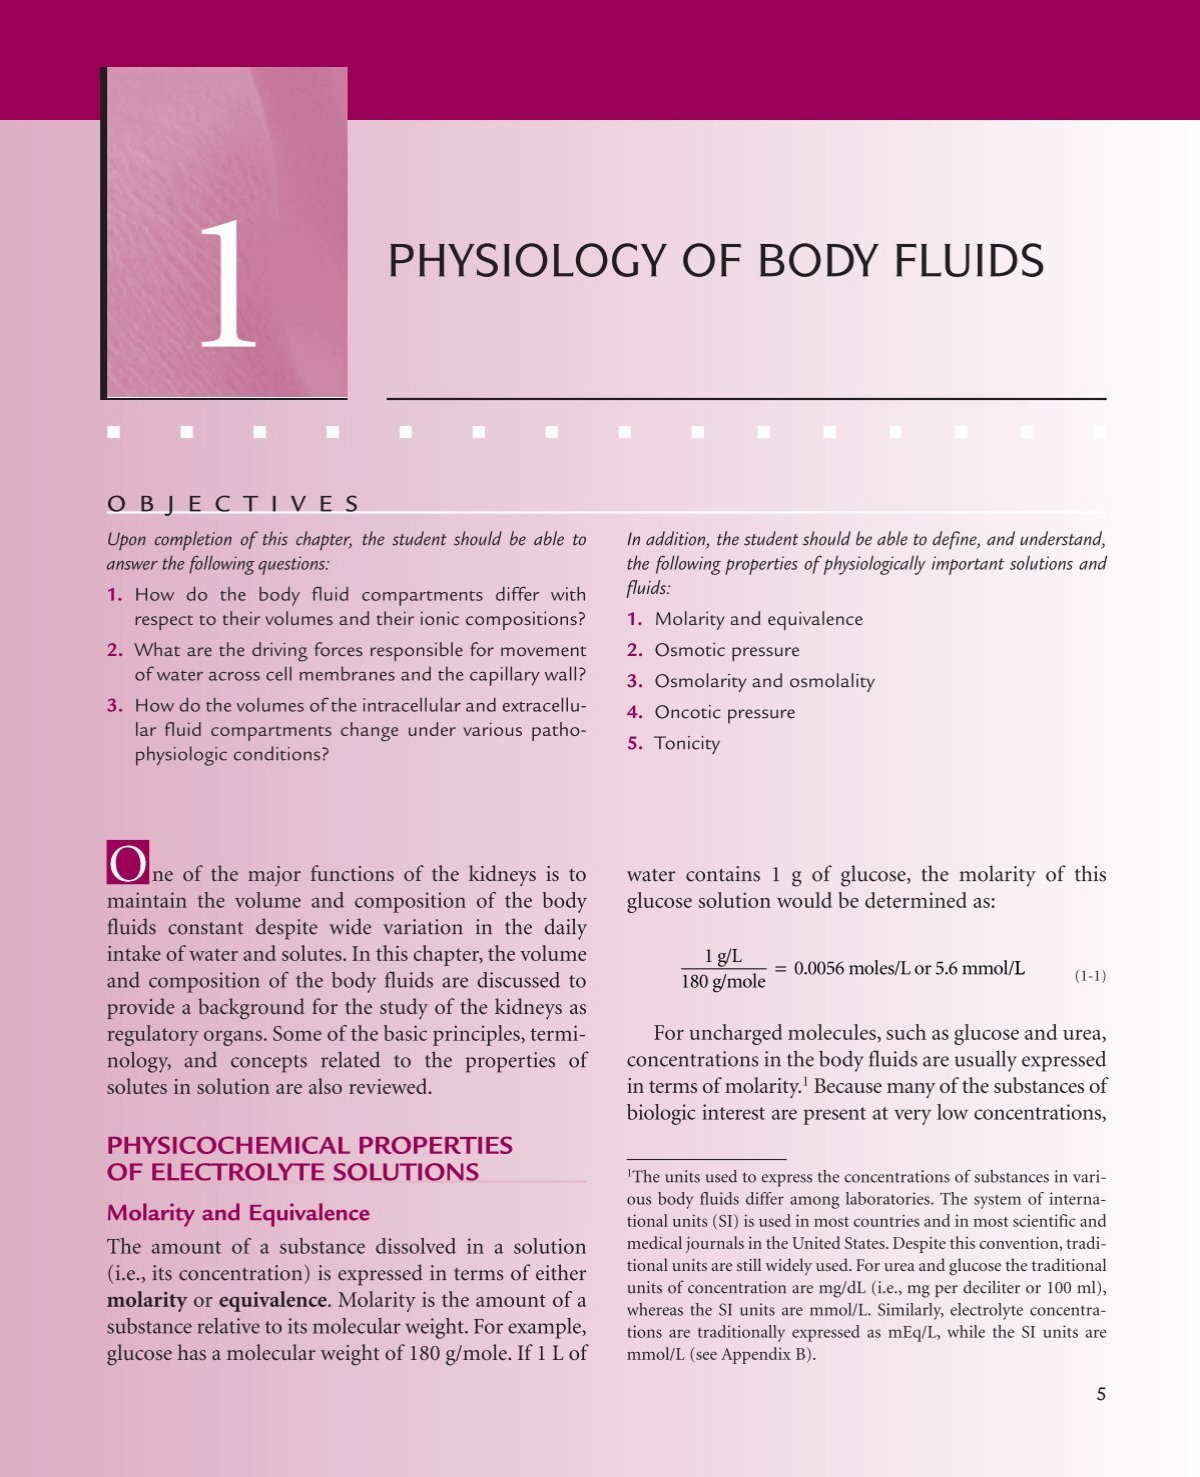 research articles on body fluids